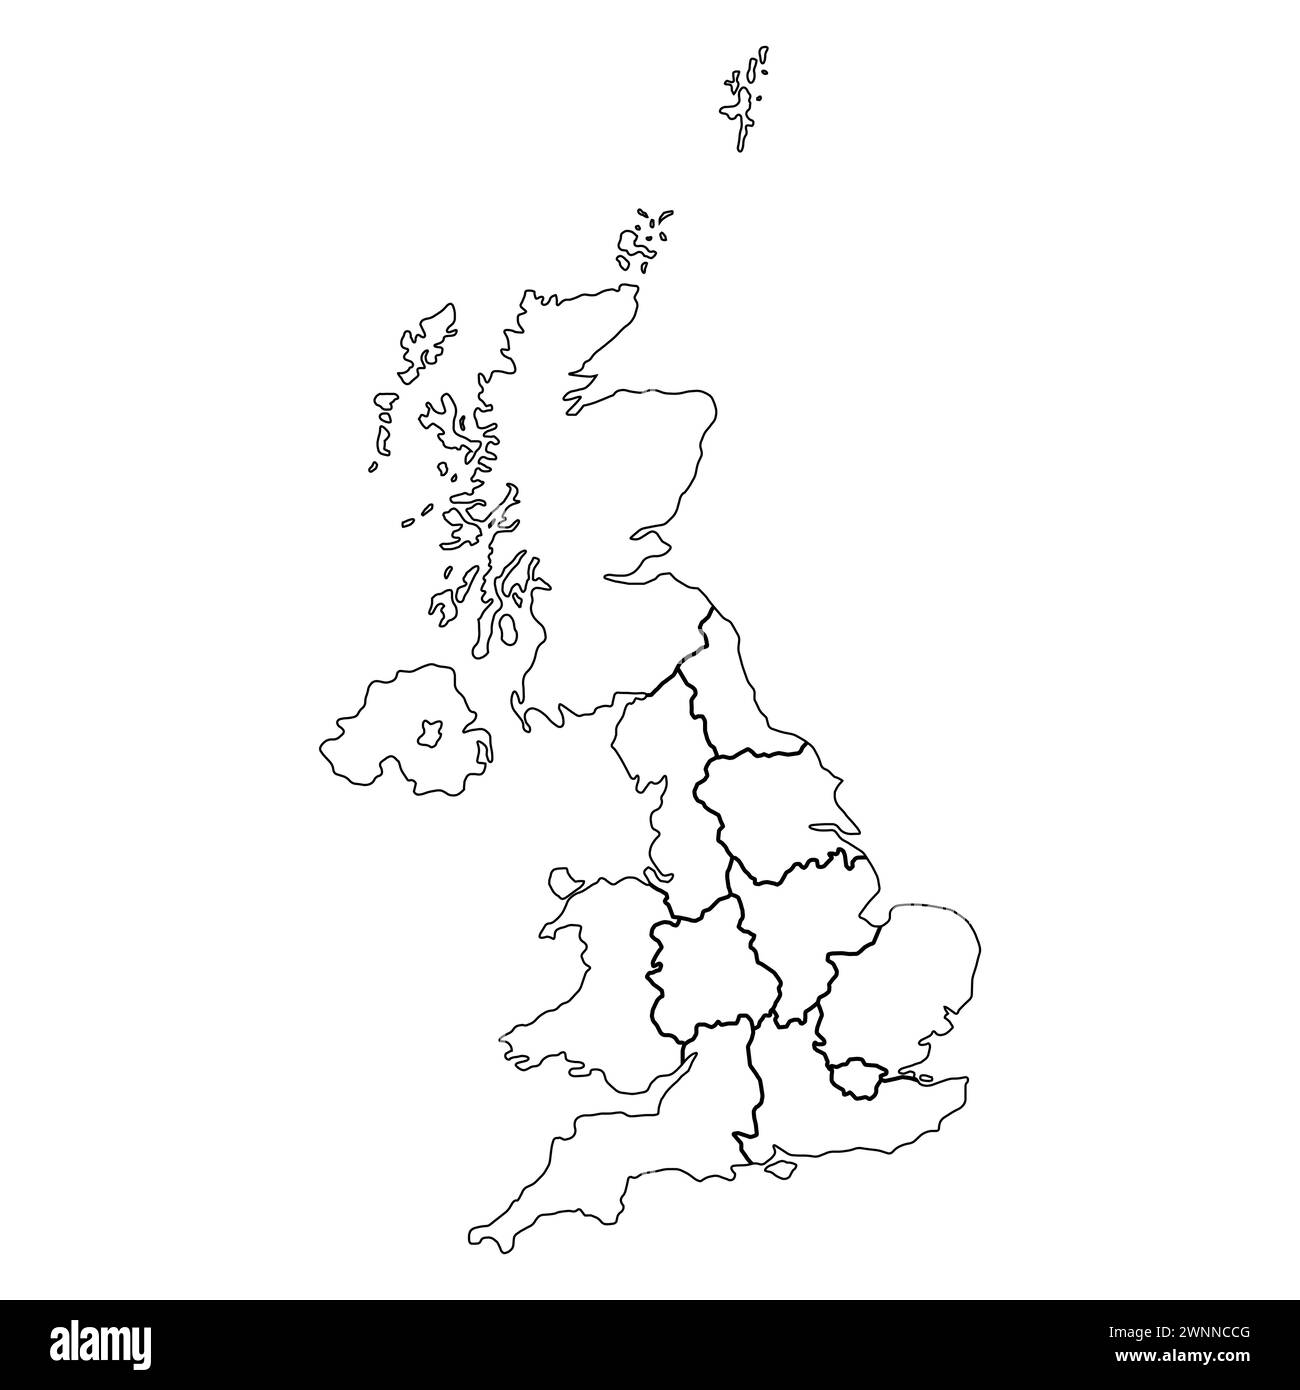 The United Kingdom of Great Britain and Northern Ireland map, detailed web vector illustration . Stock Vector